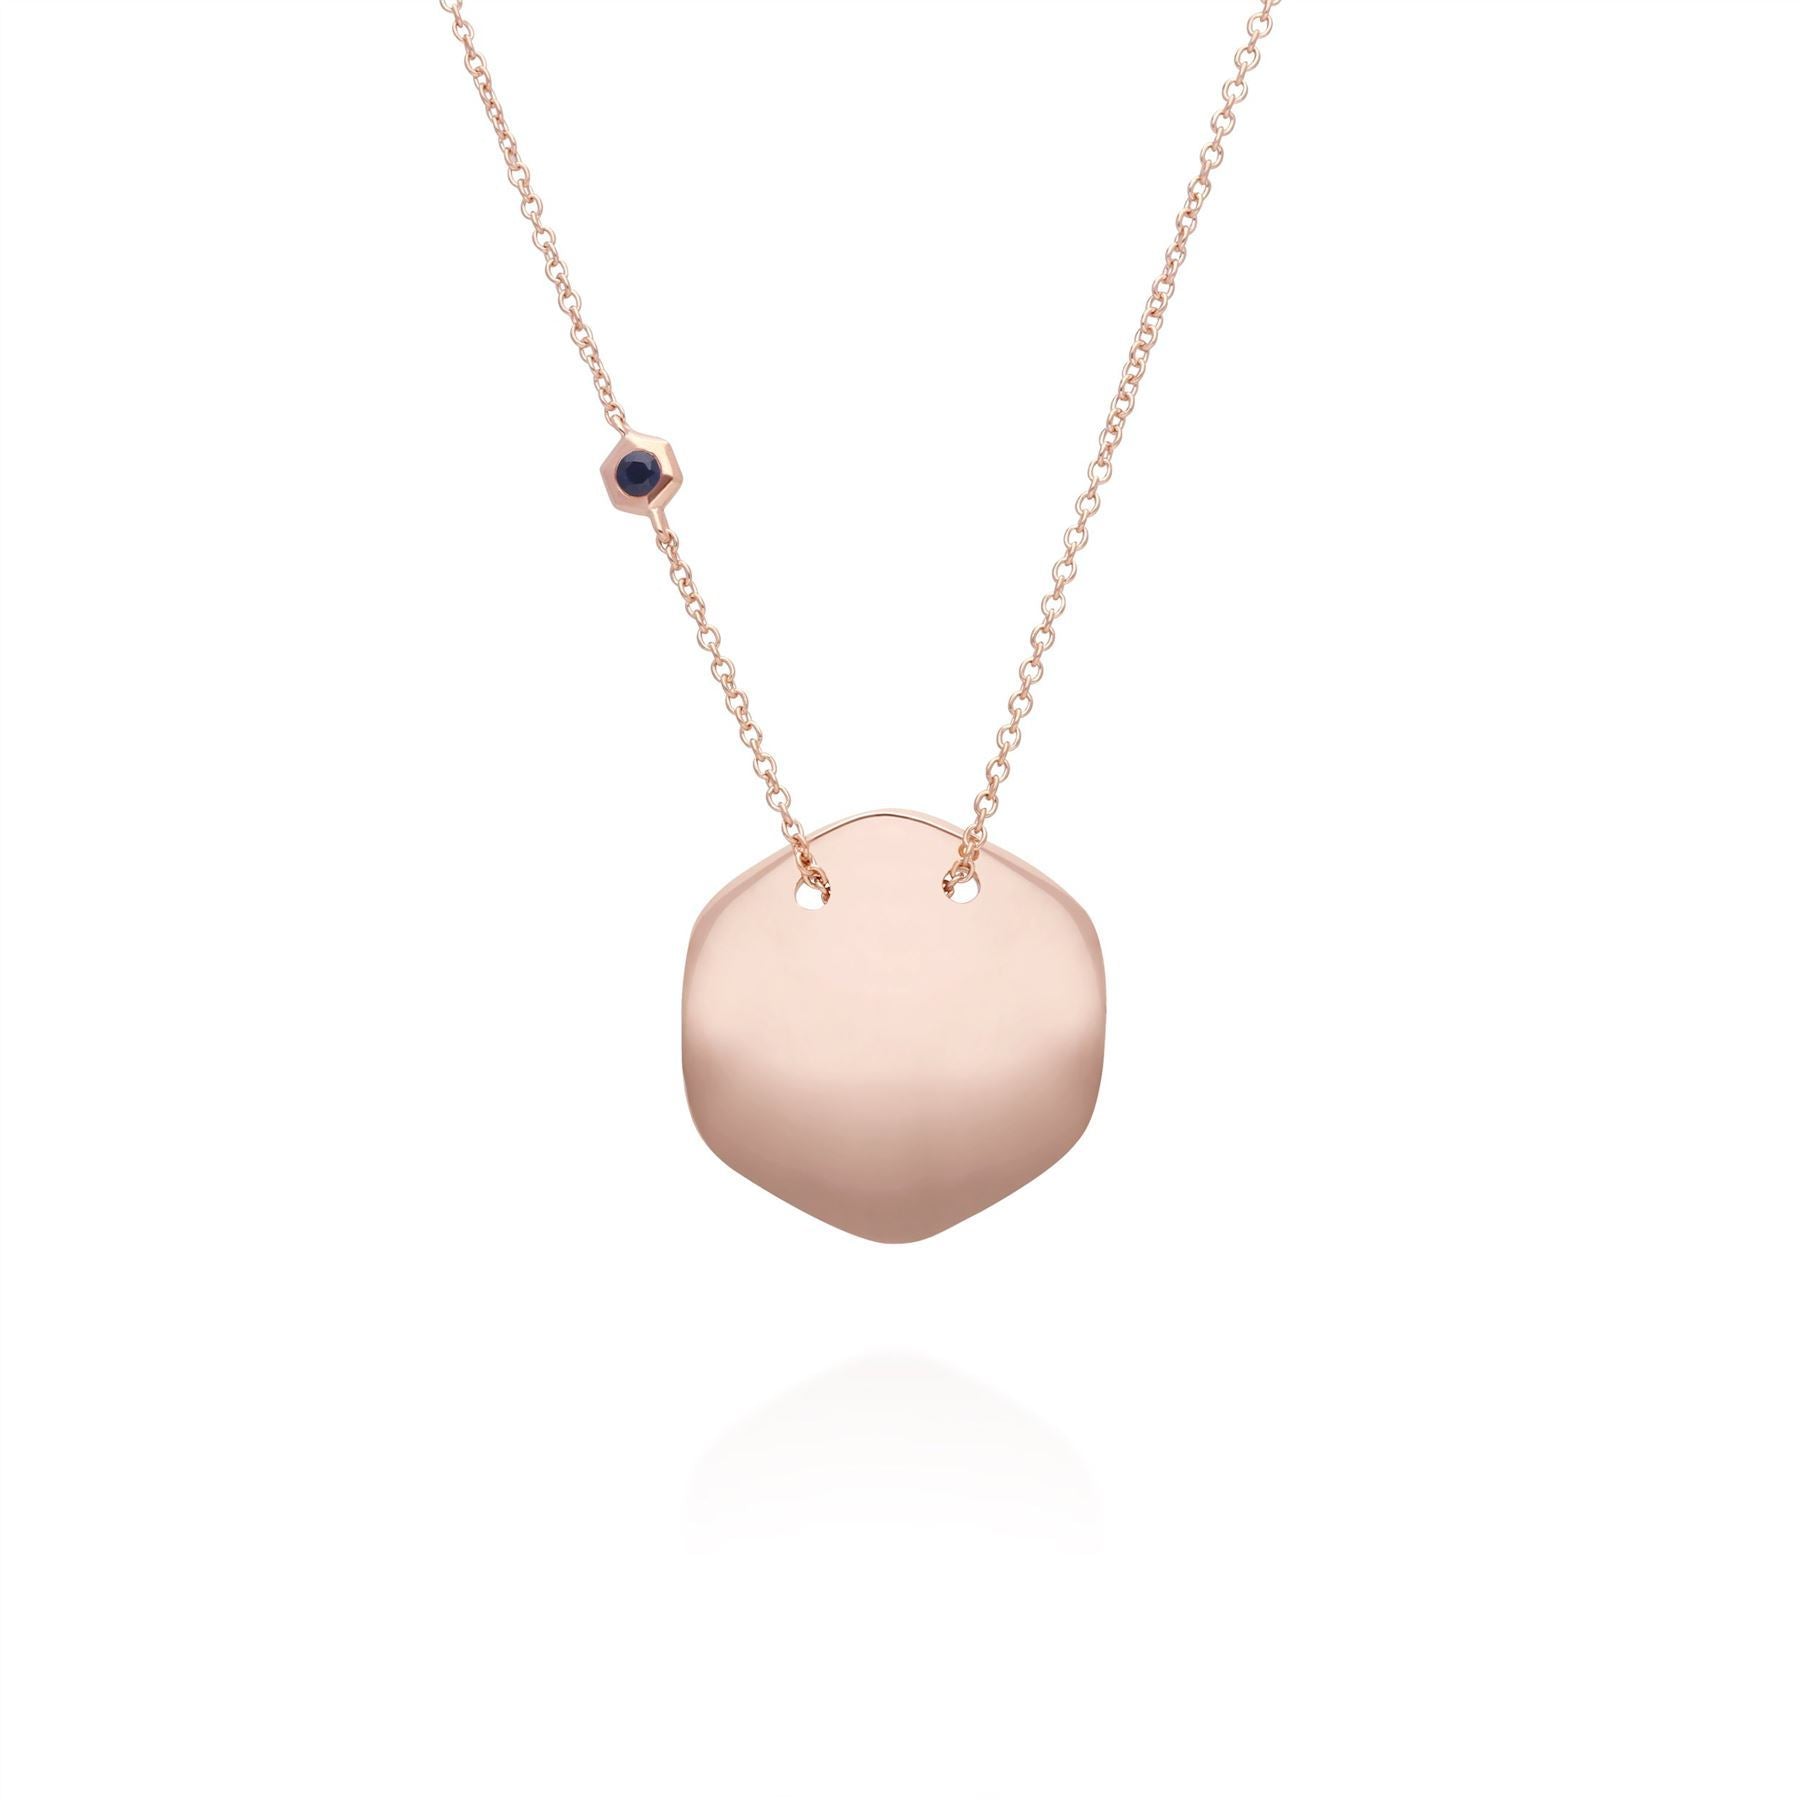 Sapphire Engravable Necklace in Rose Gold Plated Sterling Silver